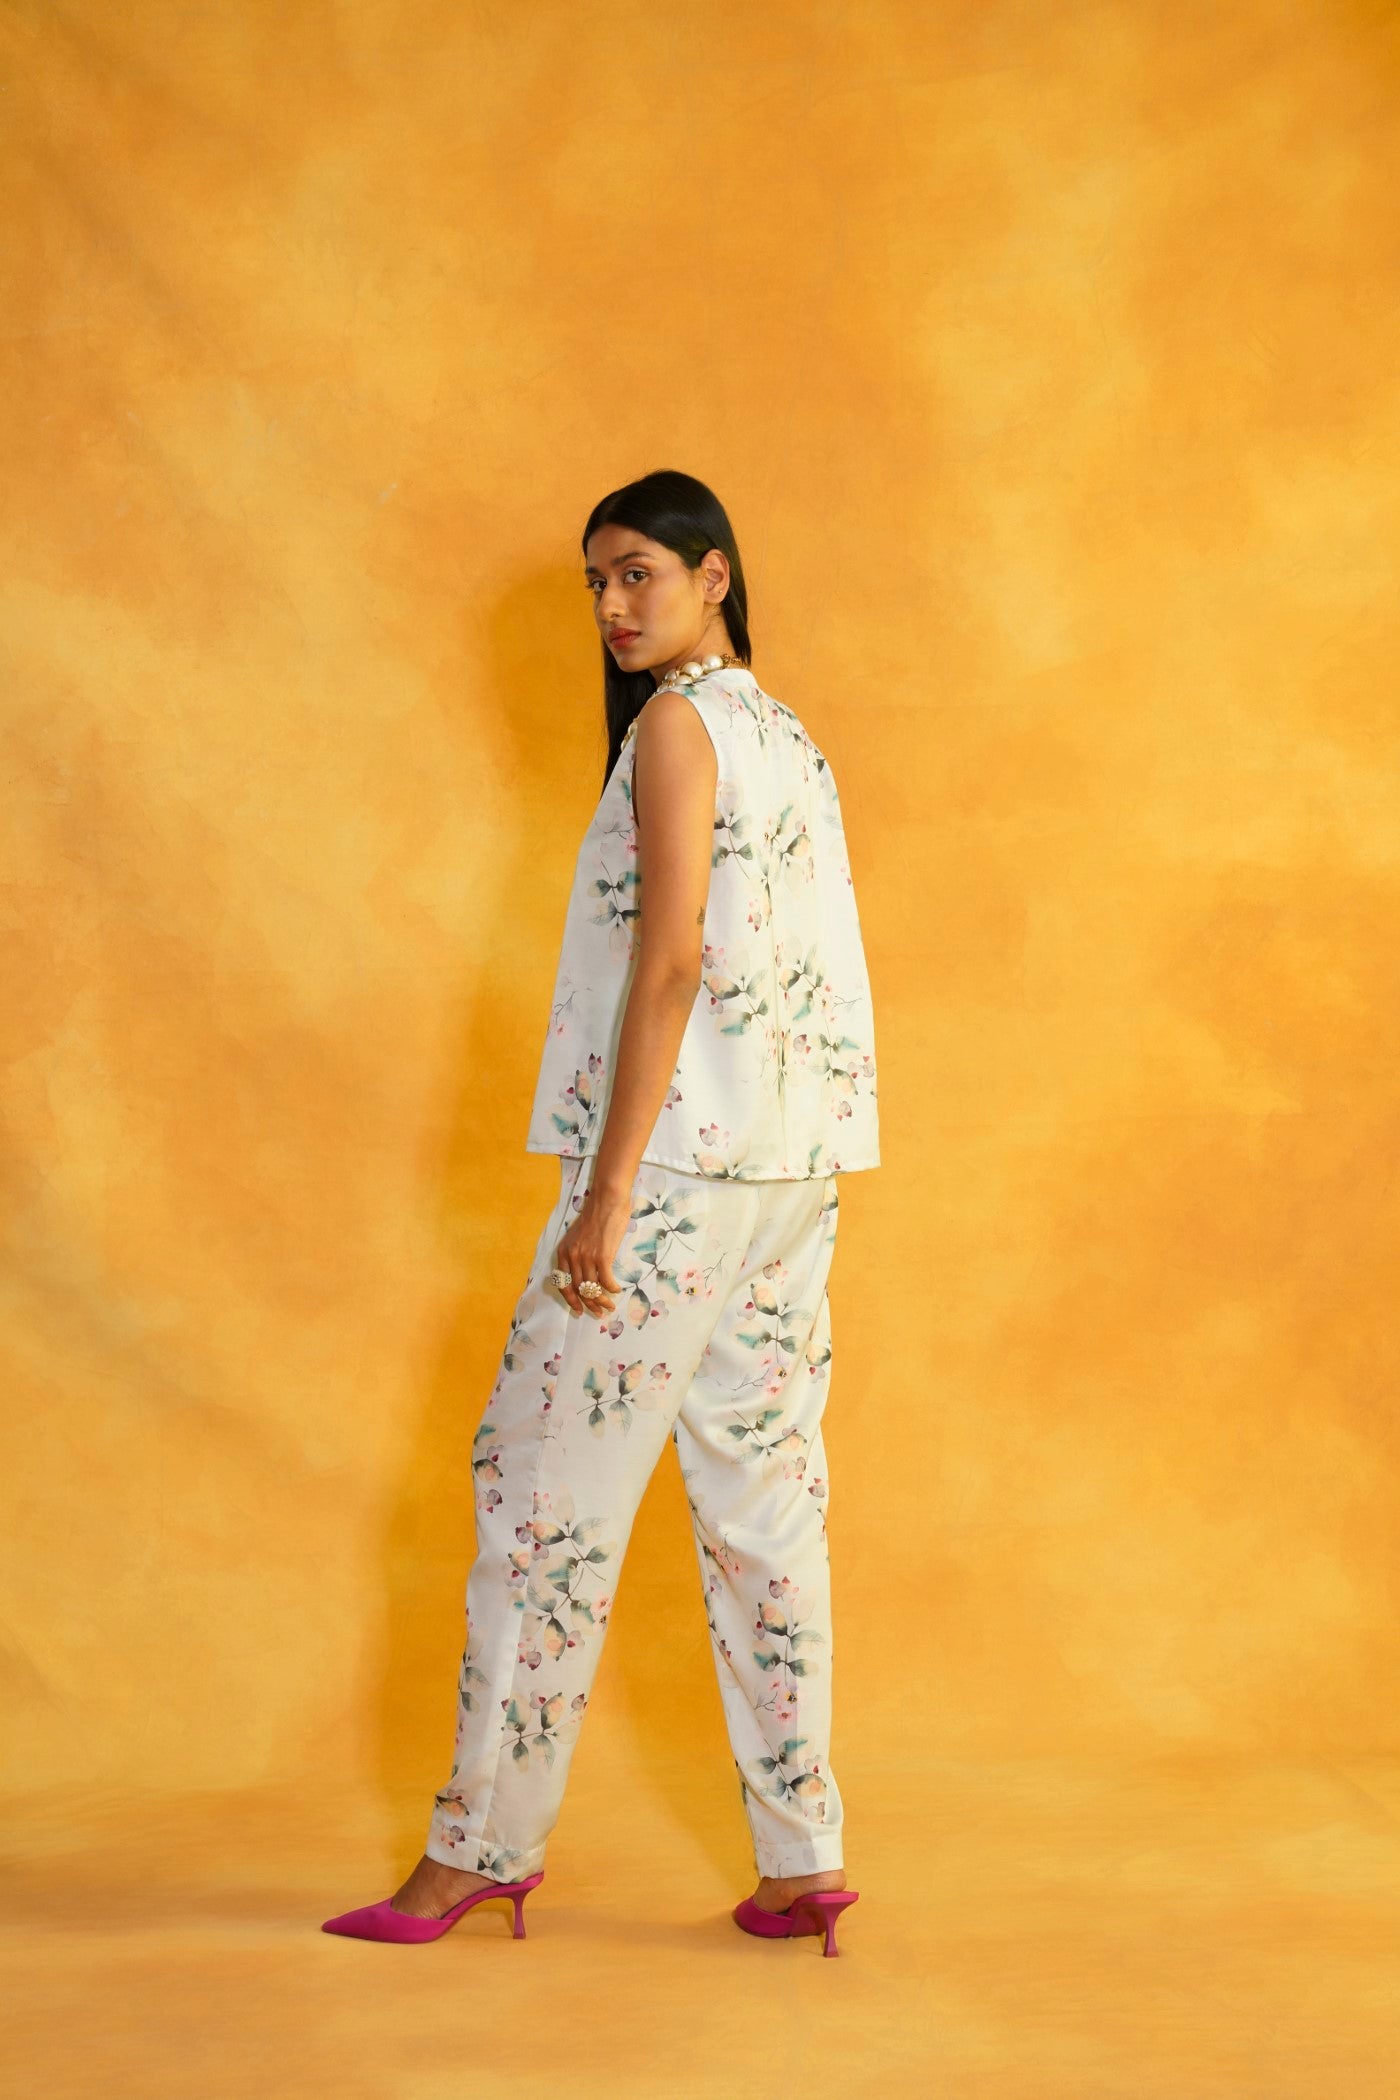 Zara Floral Print Trousers  Style With a Smile Link Up  Style Splash